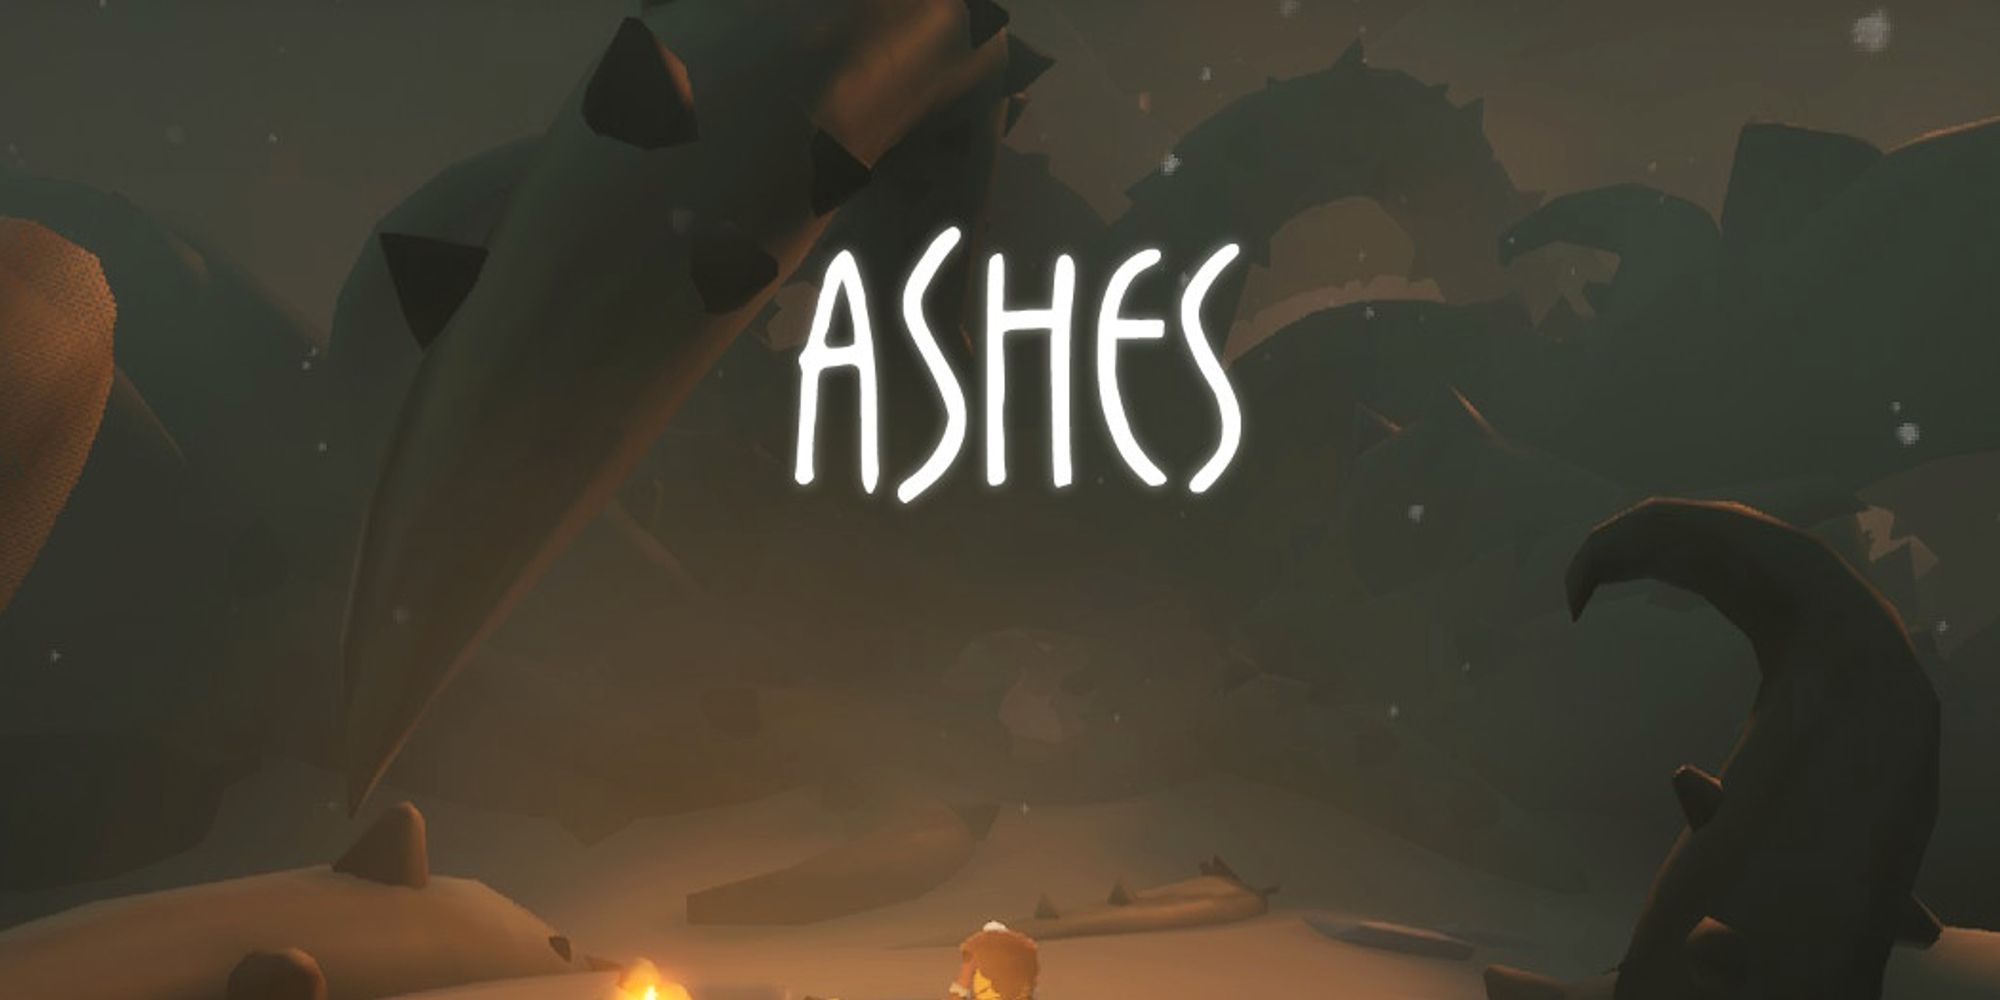 player standing at beginning of ashes level with 'ashes' lettering on top of image